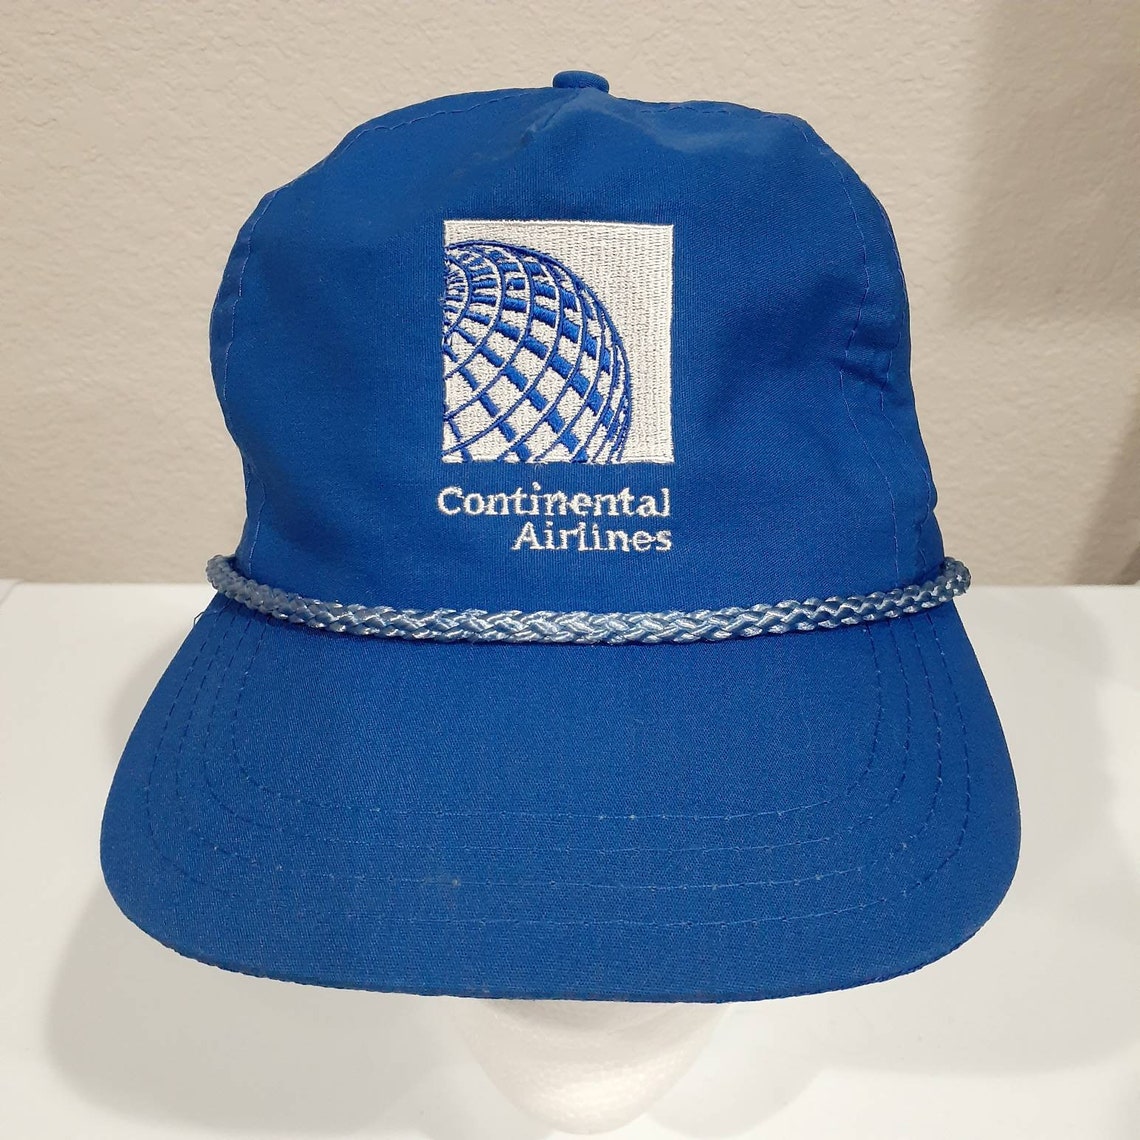 Vintage Blue Continental Airlines Trucker Style Adjustable Hat | Etsy